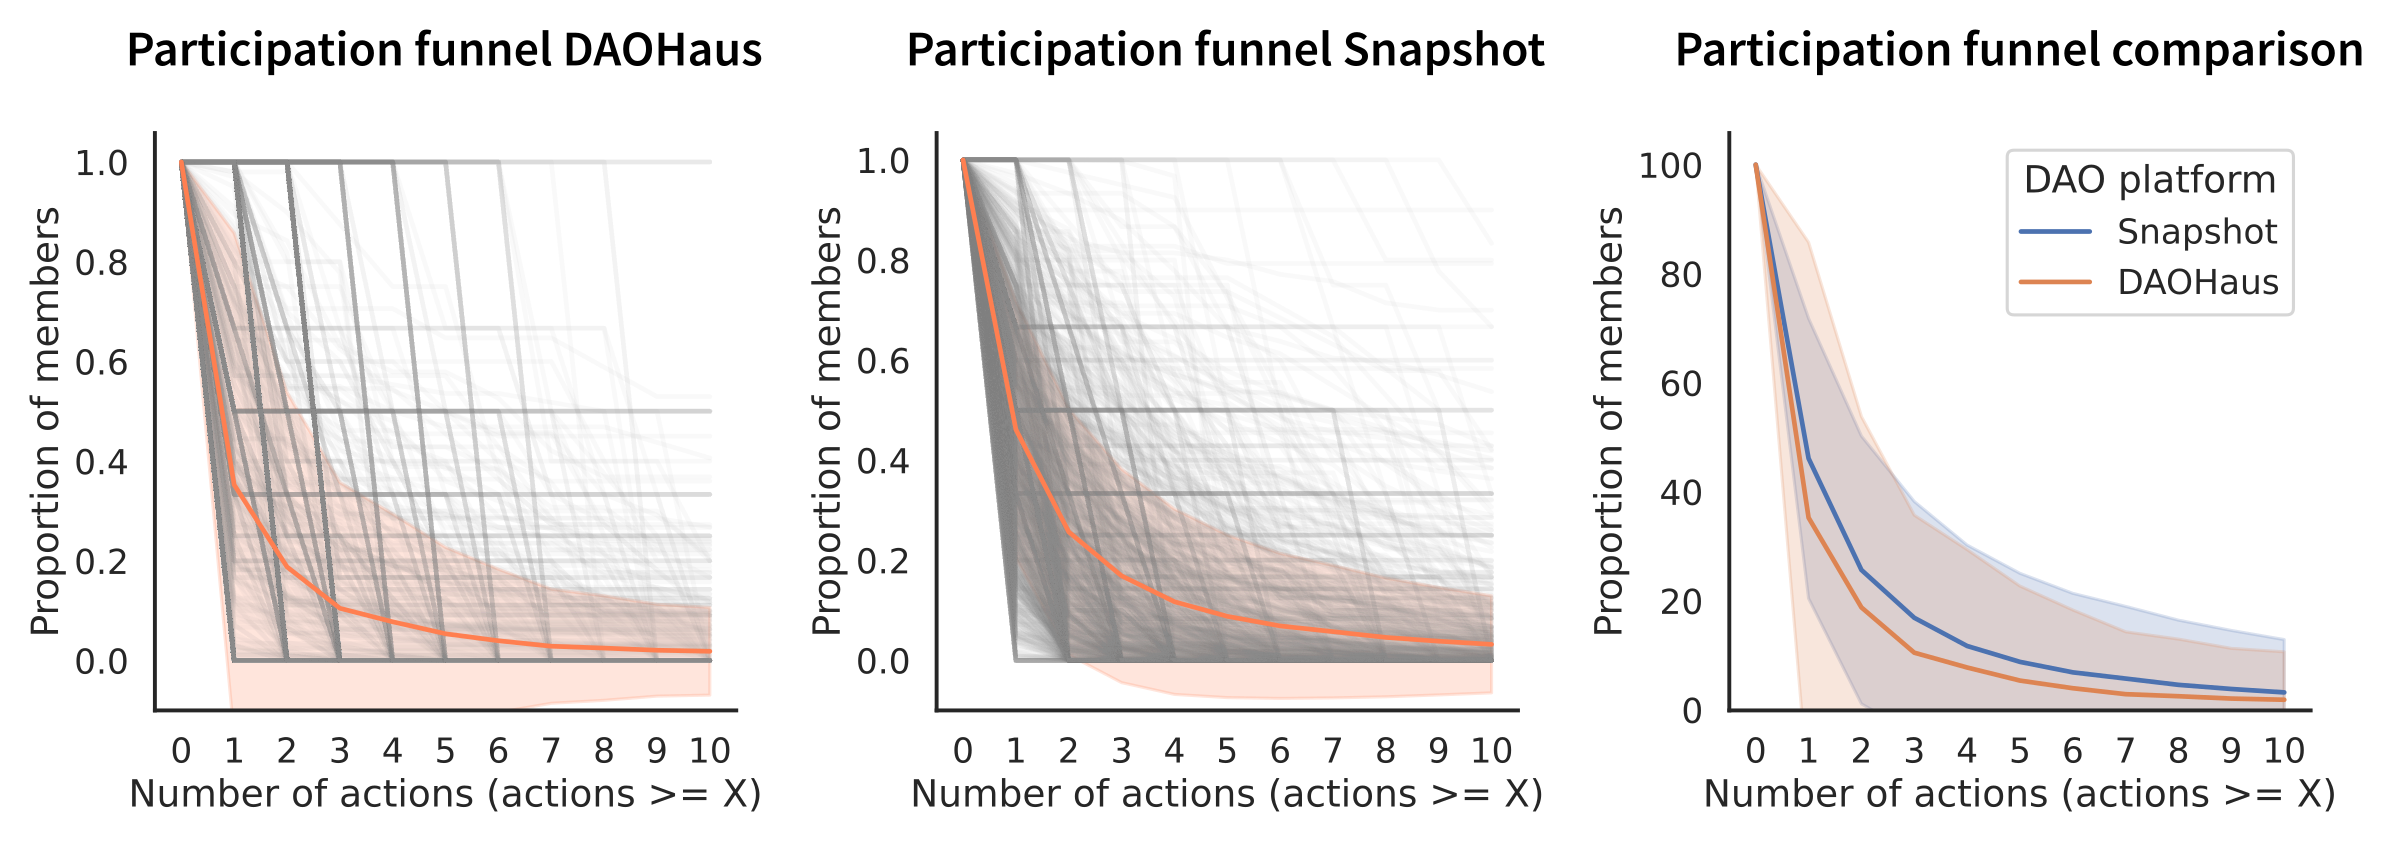 Participation funnel across DAOs on DAOHaus and Snapshot. In grey are every single DAO, in orange, mean, and standard error. On the right, is the comparison between DAOHaus and Snapshot.